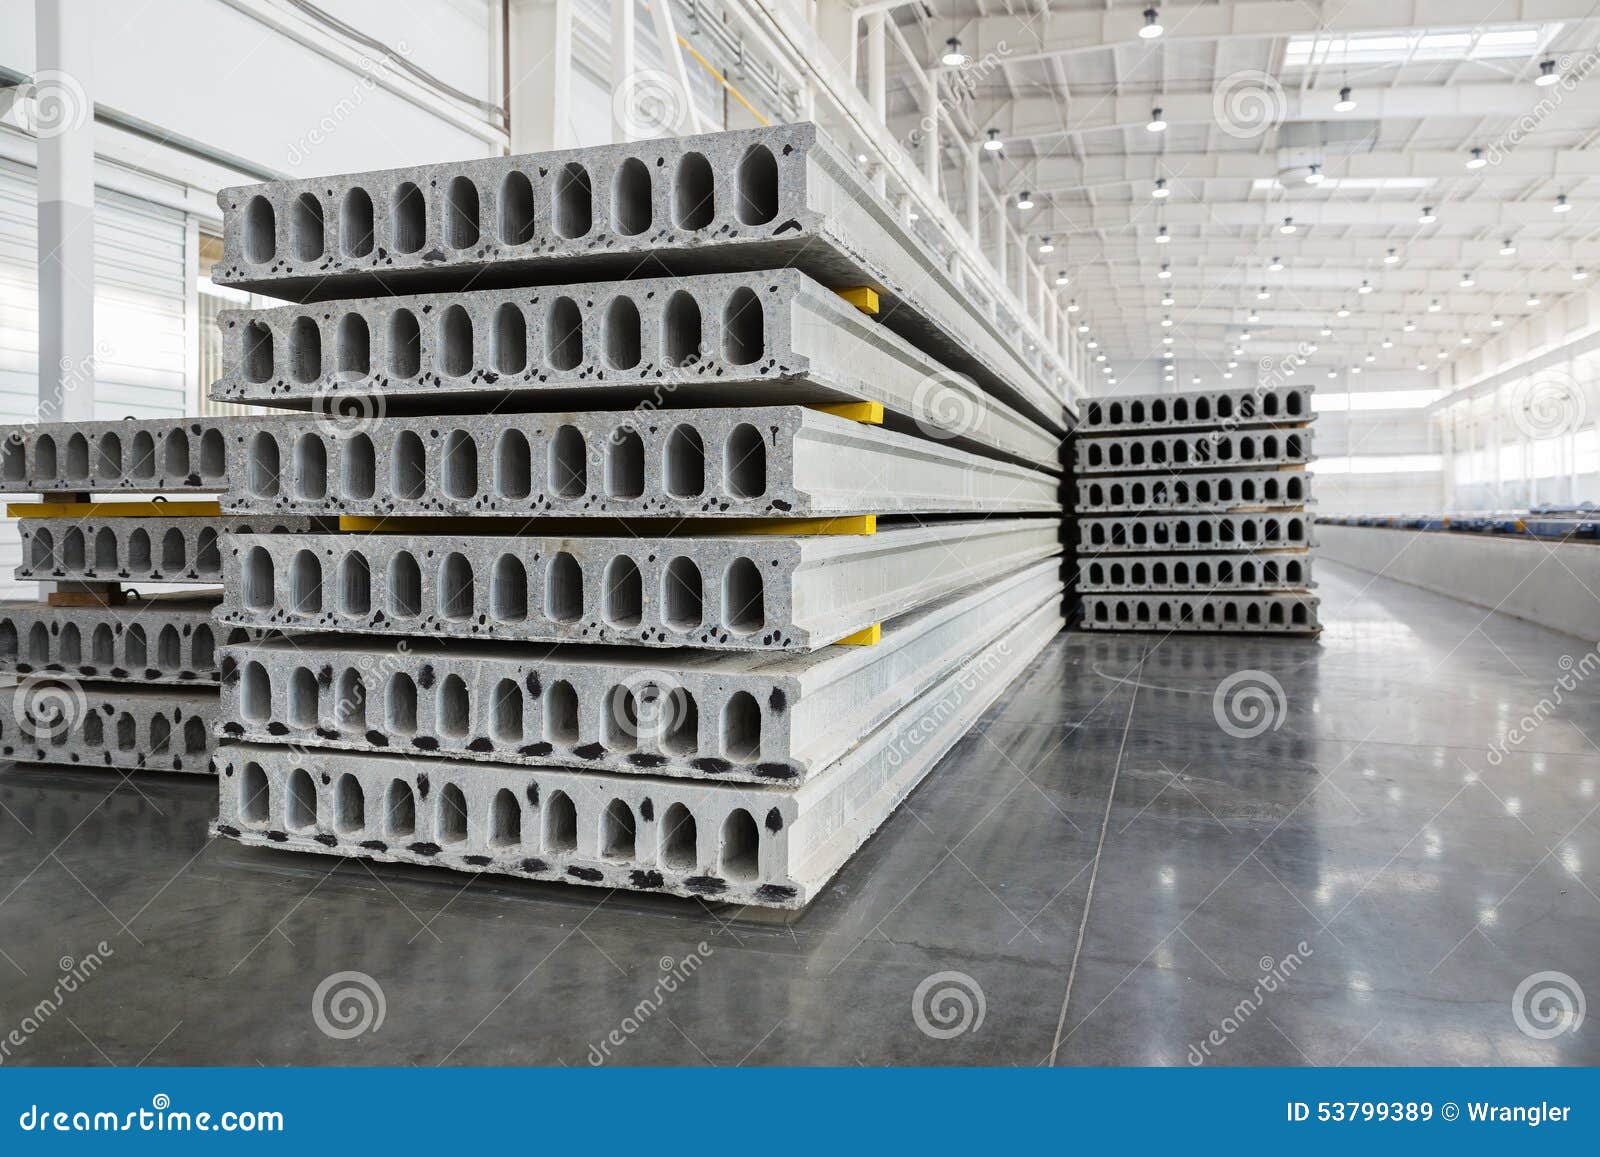 stack of reinforced concrete slabs in a factory workshop